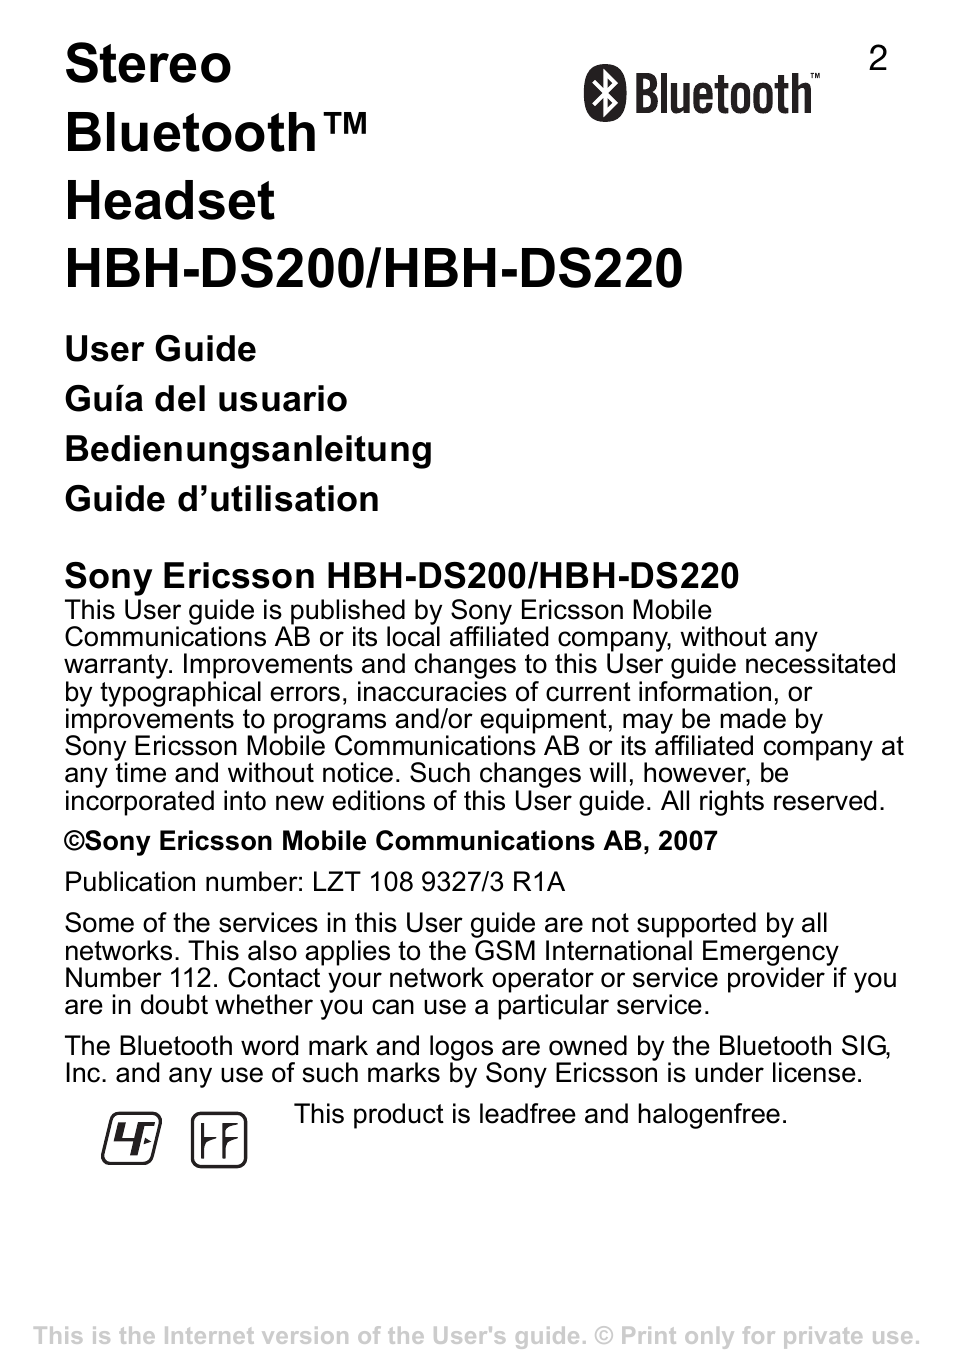 Sony Ericsson Stereo-Bluetooth-Headset HBH-DS220(DS220) User Manual | Page  2 / 36 | Original mode | Also for: HBH-DS200, HBH-DS220